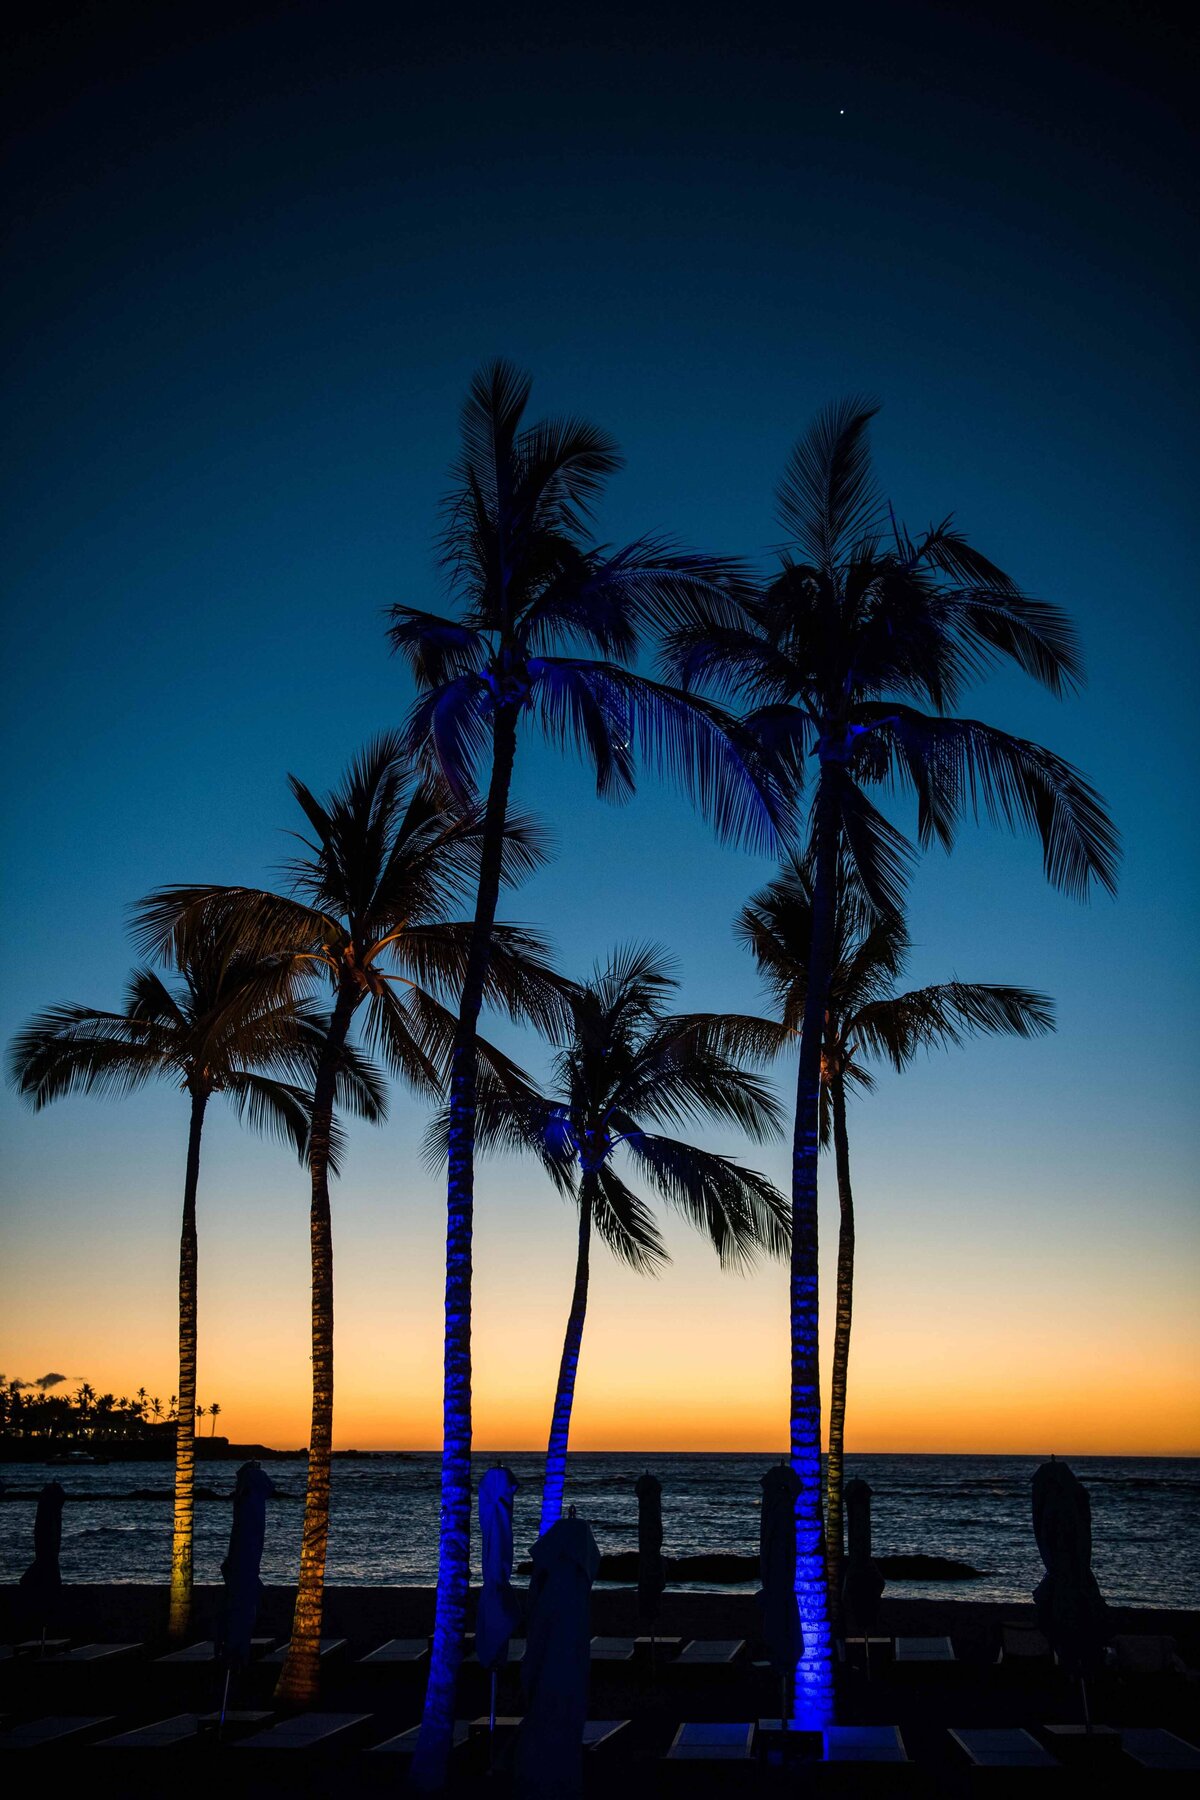 A sunset with Palm trees shot against a colorful sky at the resort